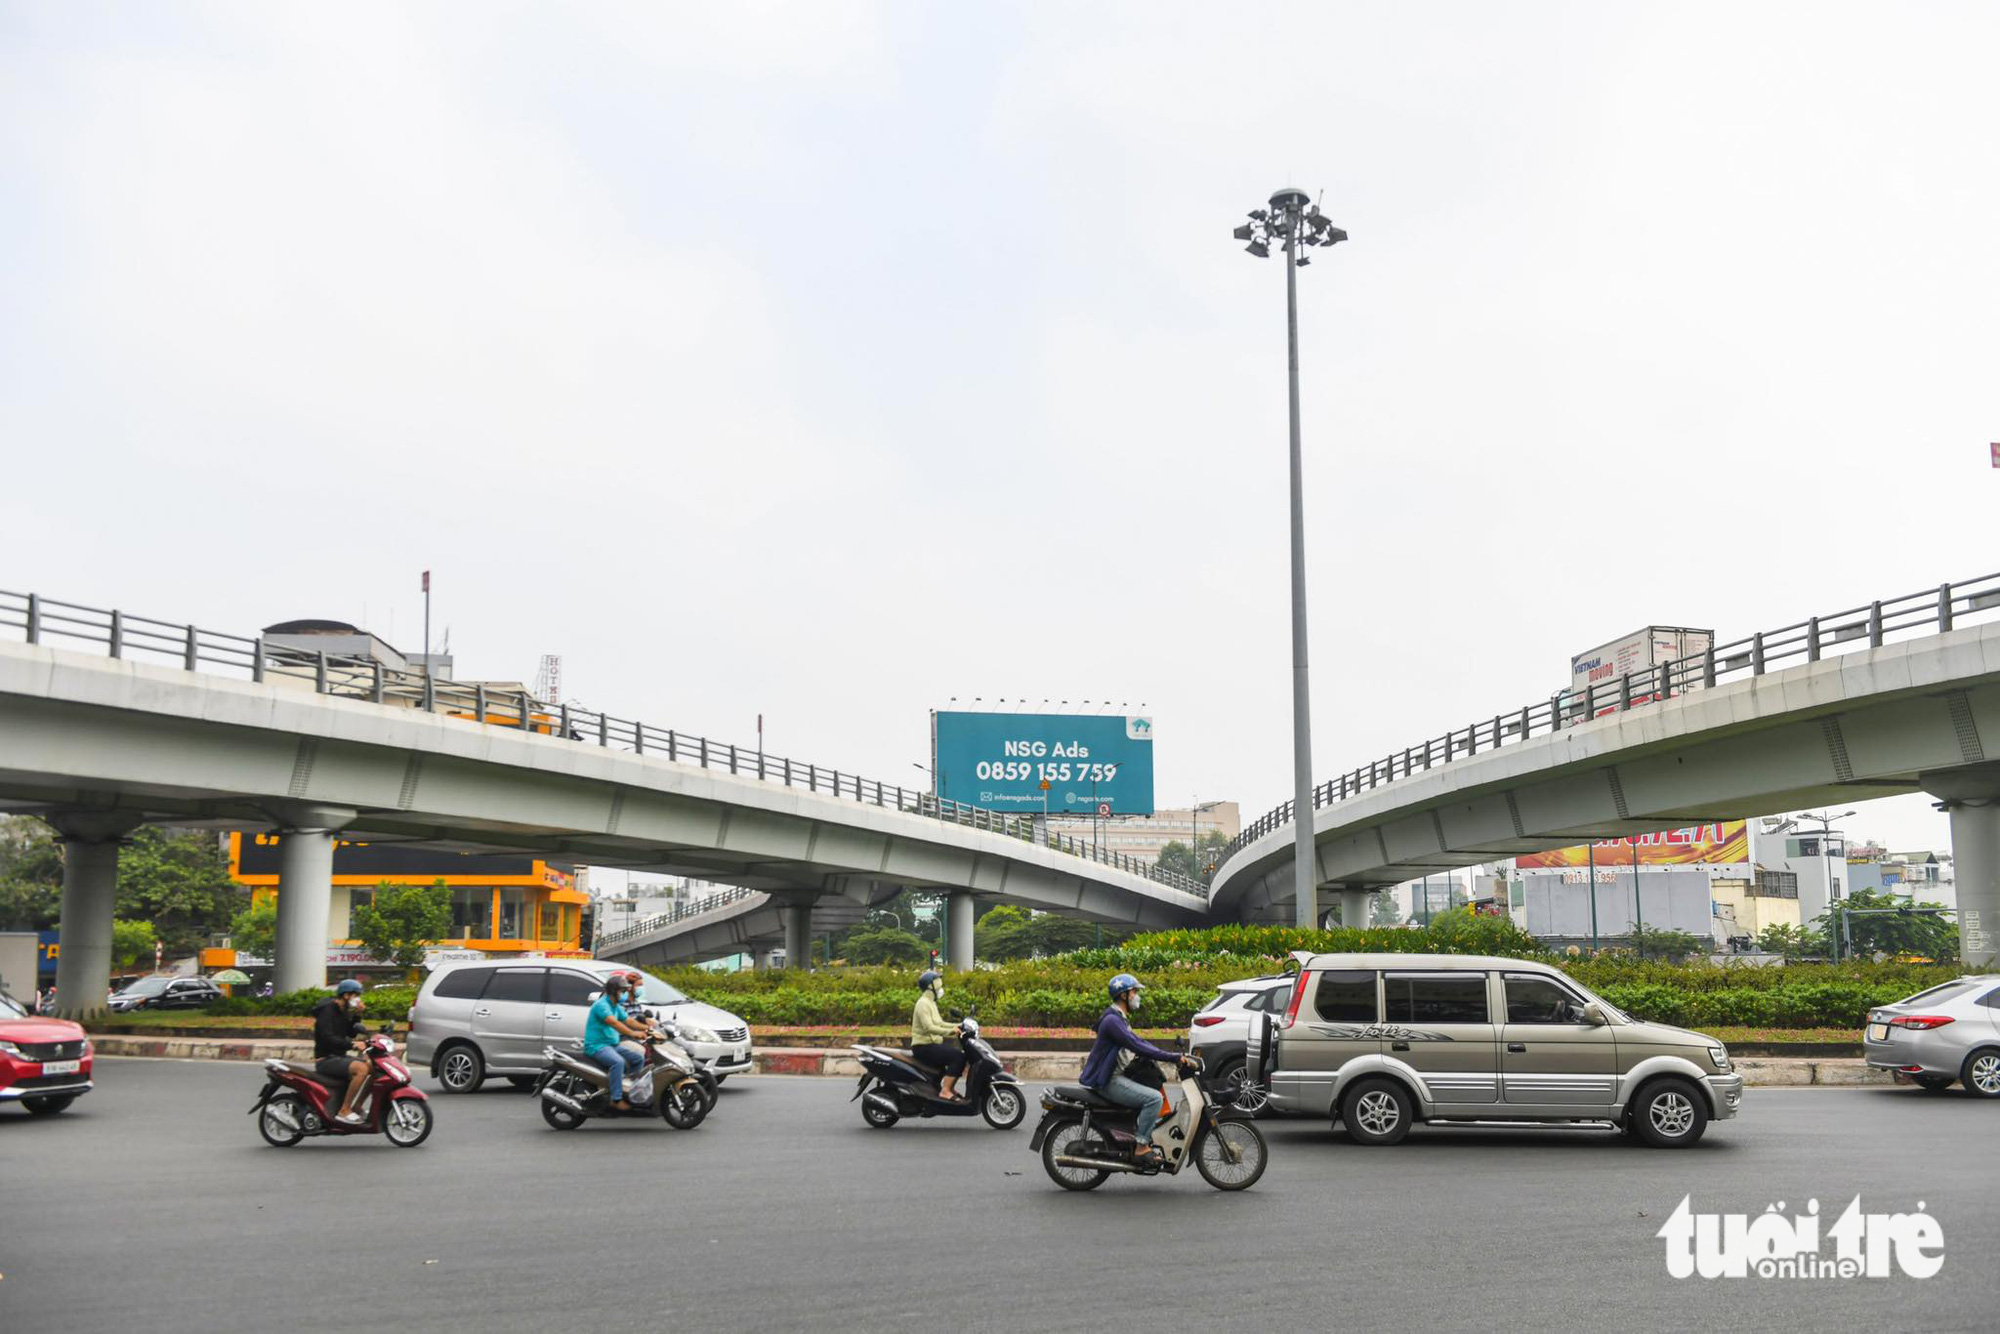 Nguyen Thai Son Roundabout was initially large. It was built as a gateway to Go Vap District 10 years ago.